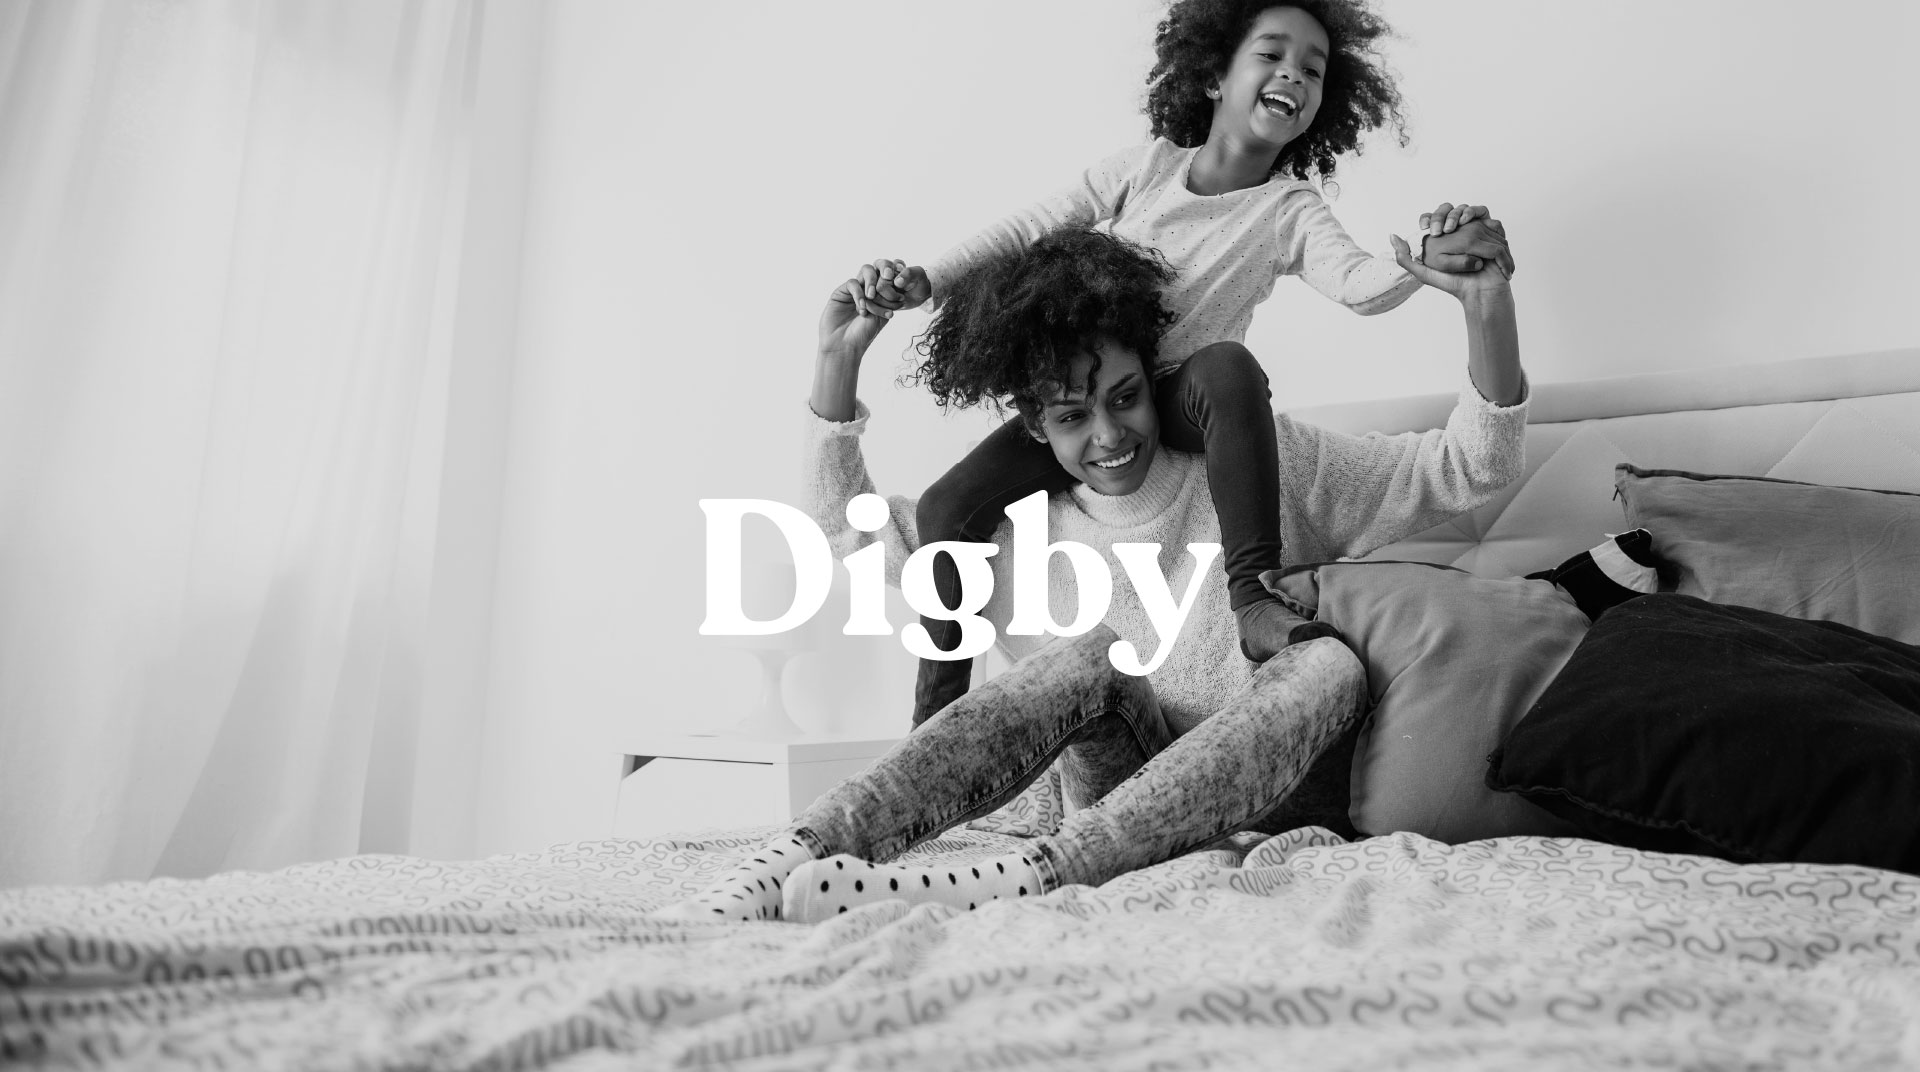 Digby Ad example